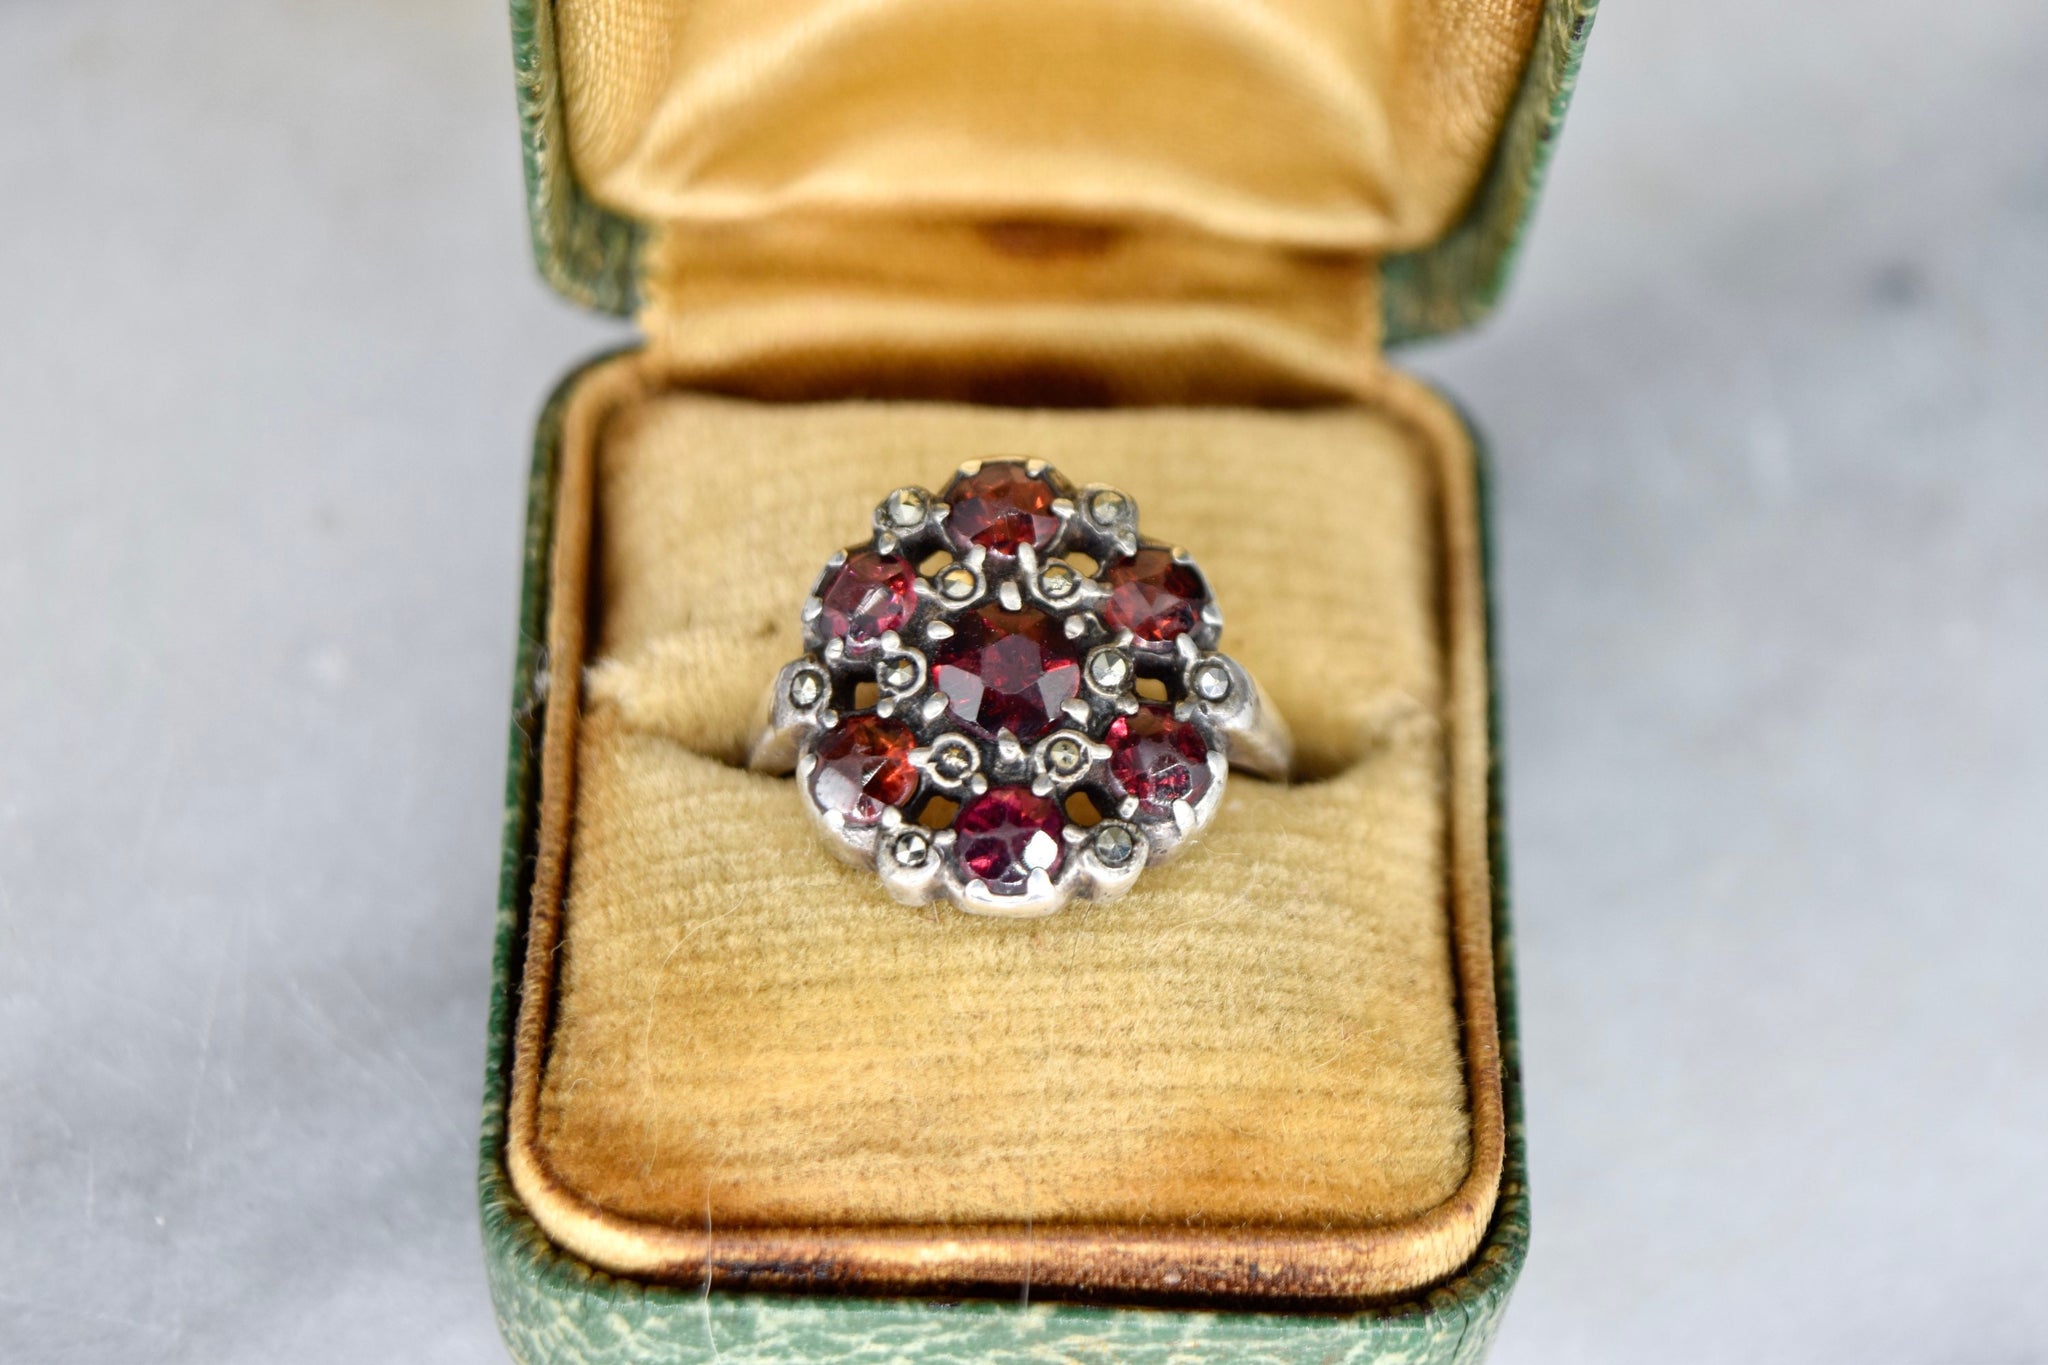 Antique Garnet And Marcasite Silver Ring c.1920s